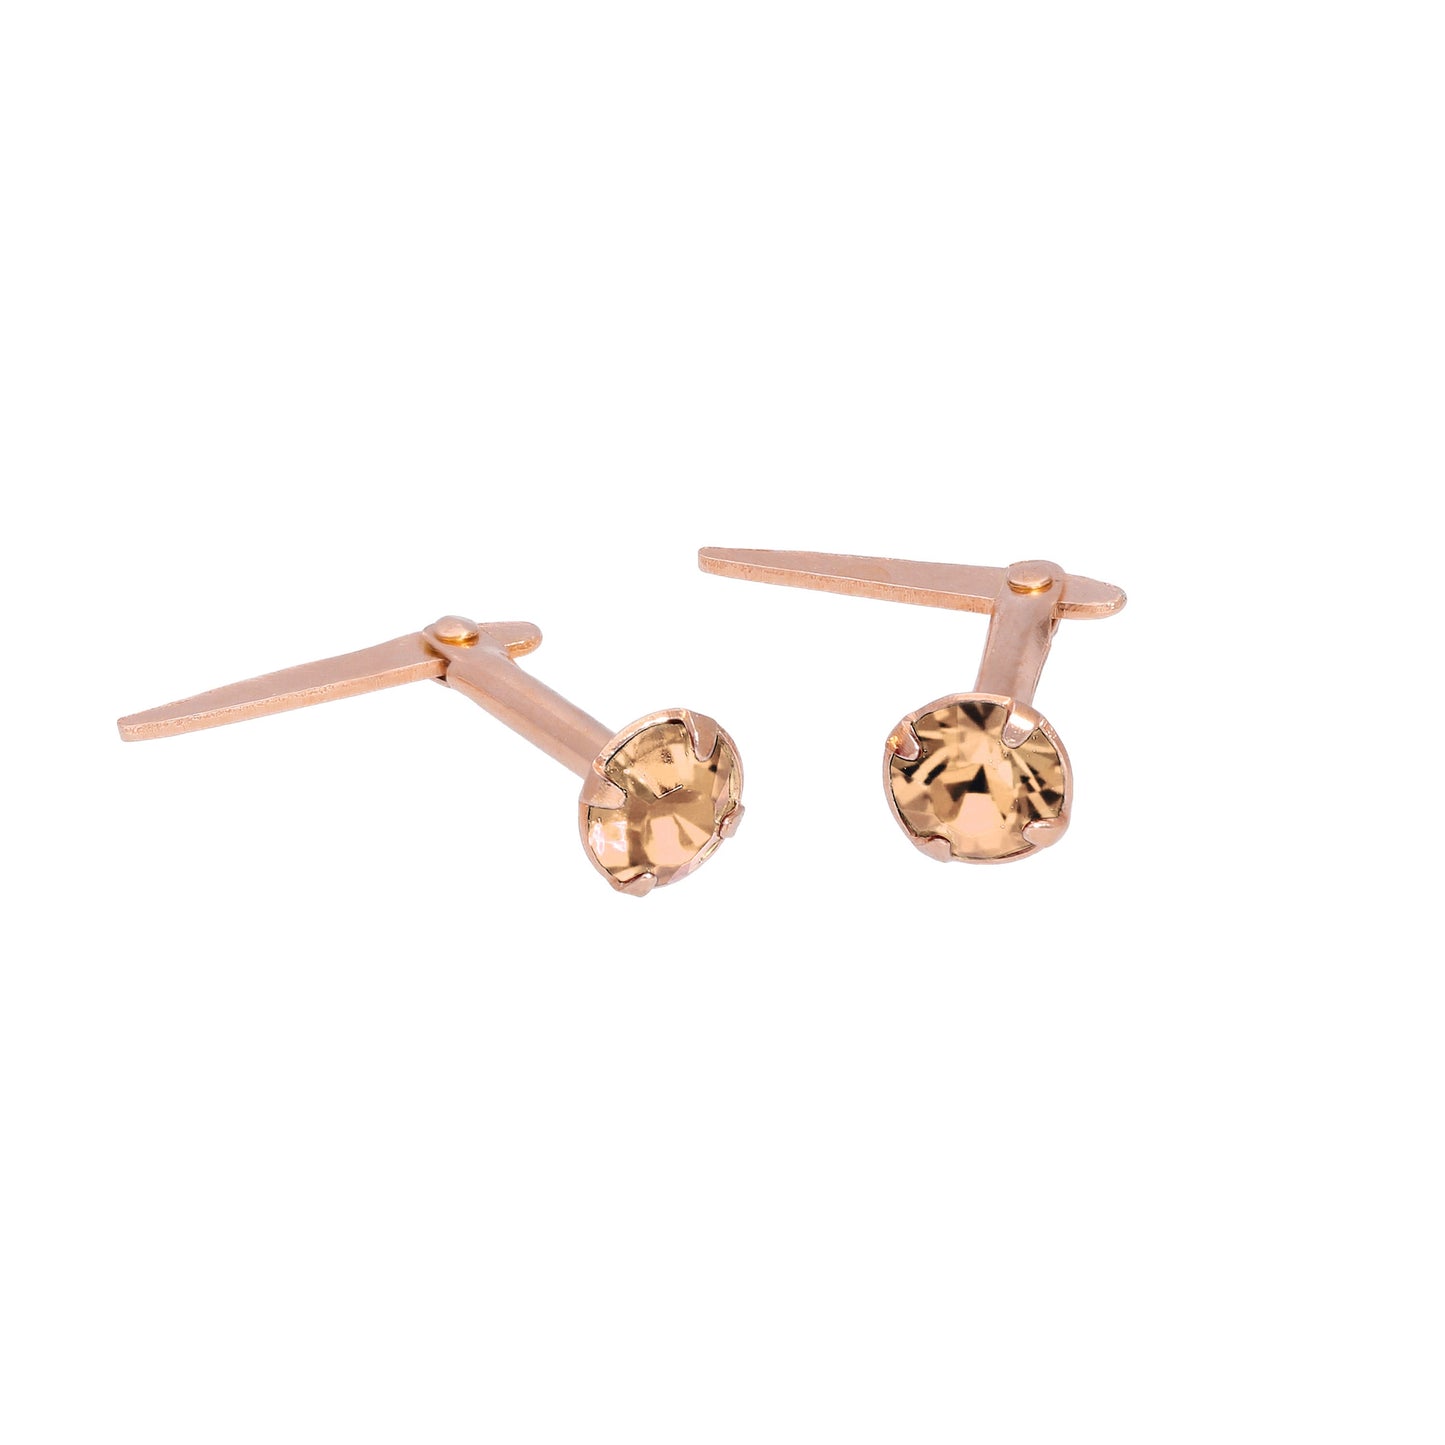 Rose Gold Plated Sterling Silver 3mm CZ Crystal Andralok Stud Earrings